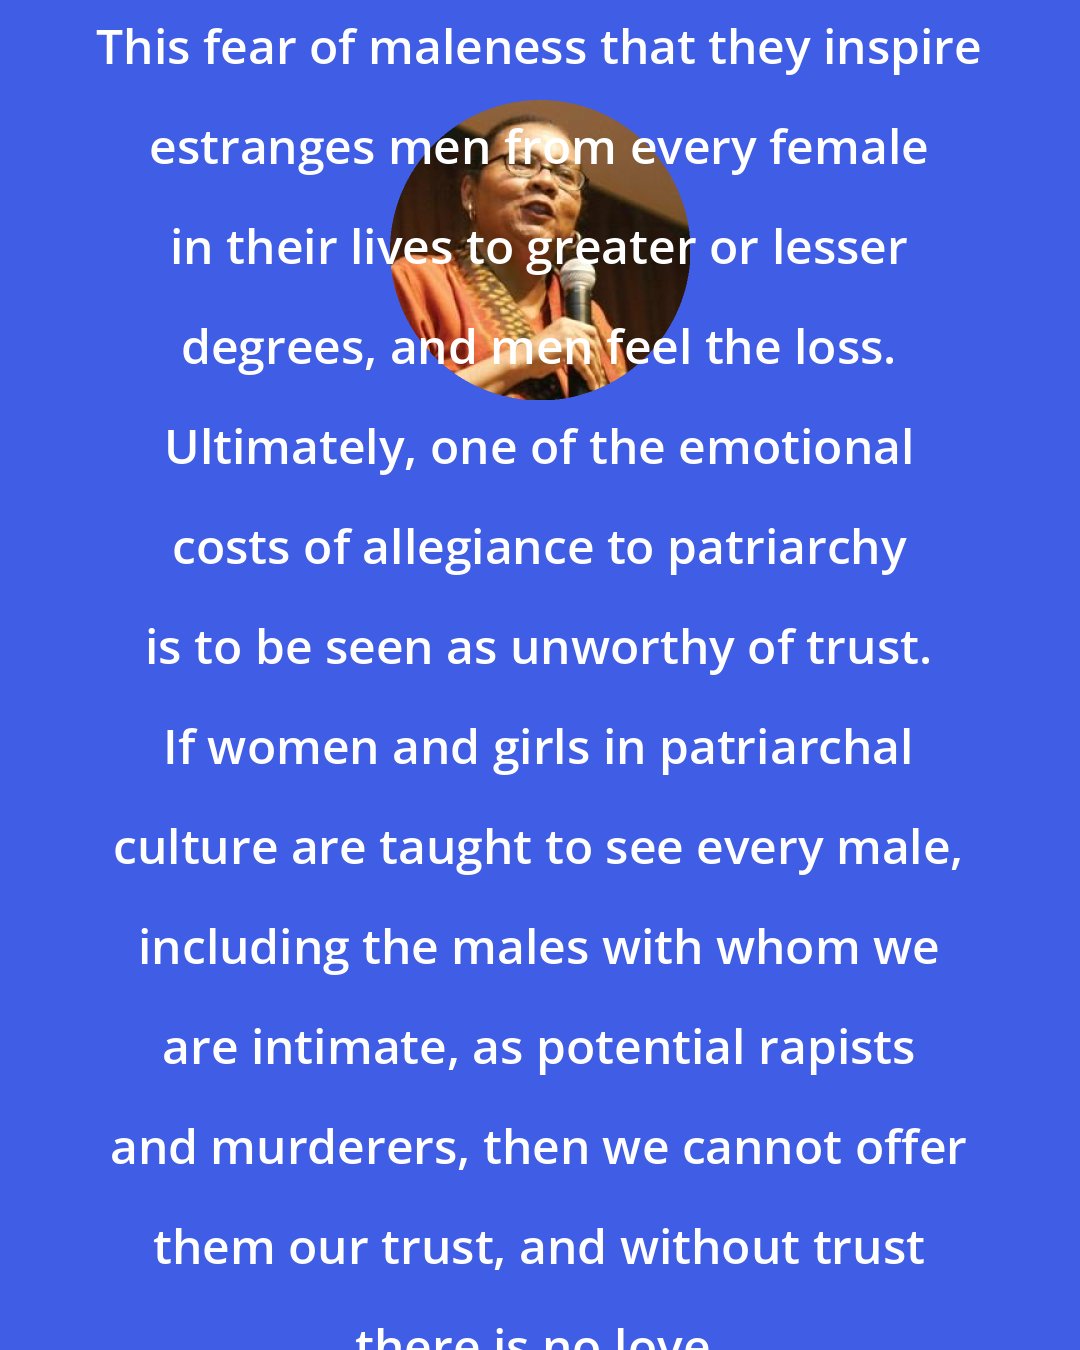 Bell Hooks: This fear of maleness that they inspire estranges men from every female in their lives to greater or lesser degrees, and men feel the loss. Ultimately, one of the emotional costs of allegiance to patriarchy is to be seen as unworthy of trust. If women and girls in patriarchal culture are taught to see every male, including the males with whom we are intimate, as potential rapists and murderers, then we cannot offer them our trust, and without trust there is no love.